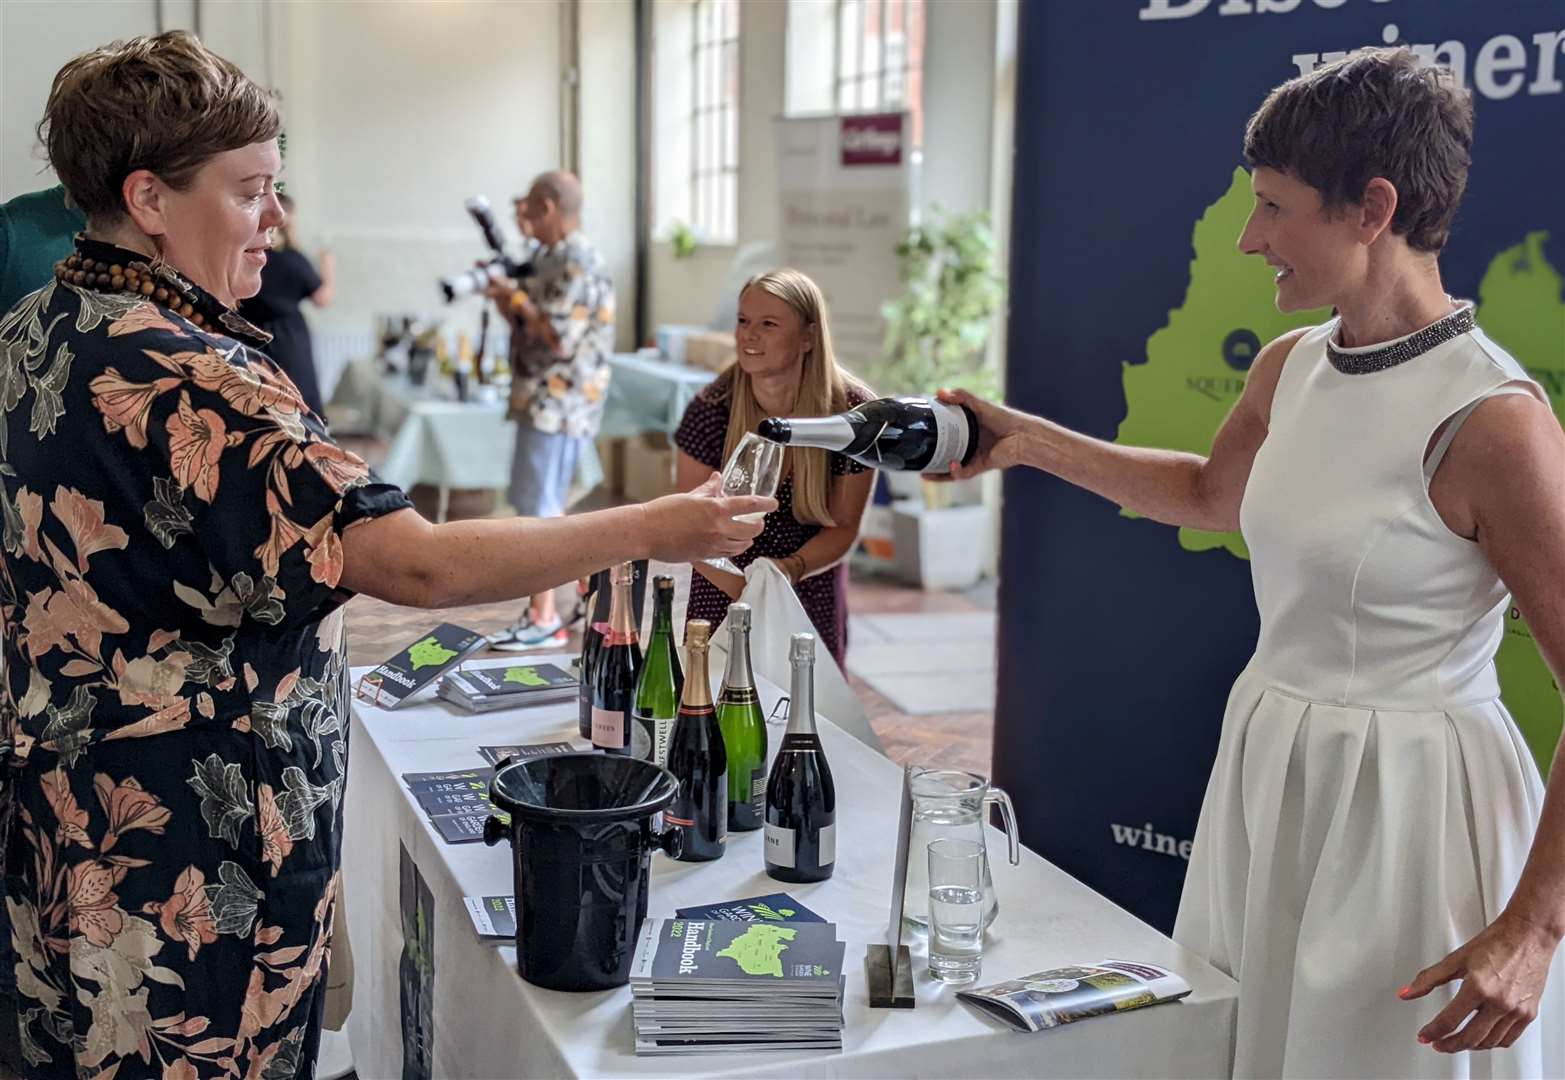 Visitors can taste as many wines as they like during their three-hour session. Picture: Canterbury Wine Festival / Carlos Dominguez